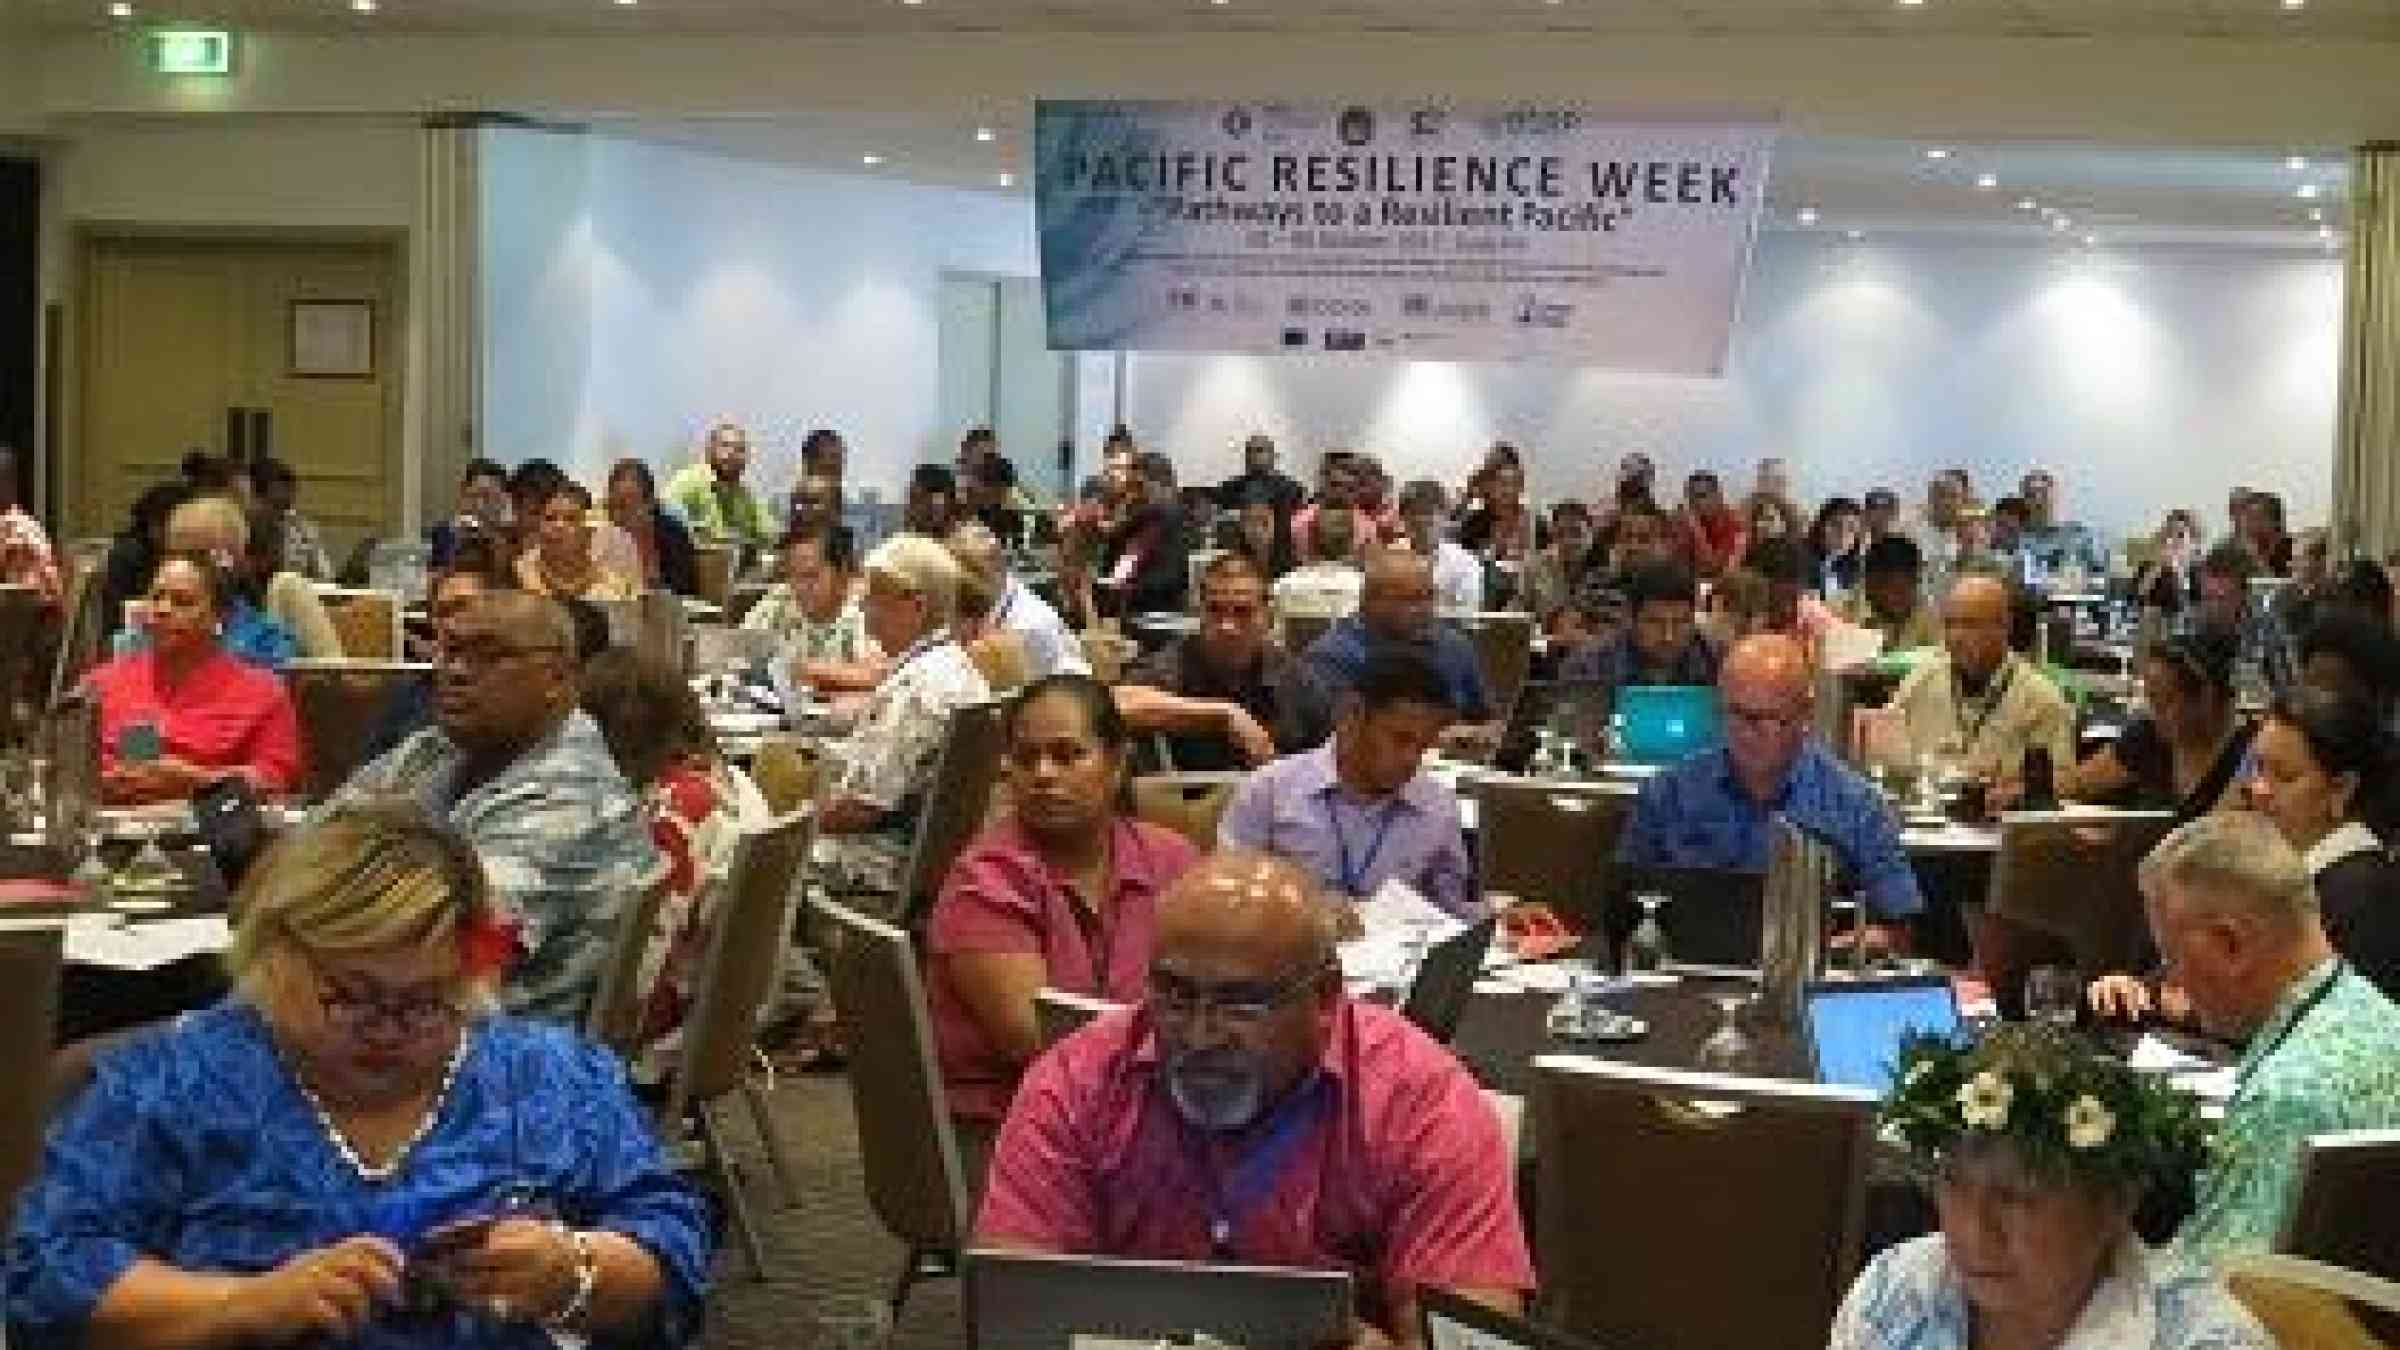 The Pacific Platform closed today highlighting key actions to move forward on integrated disaster and climate resilience (Photo: UNISDR)